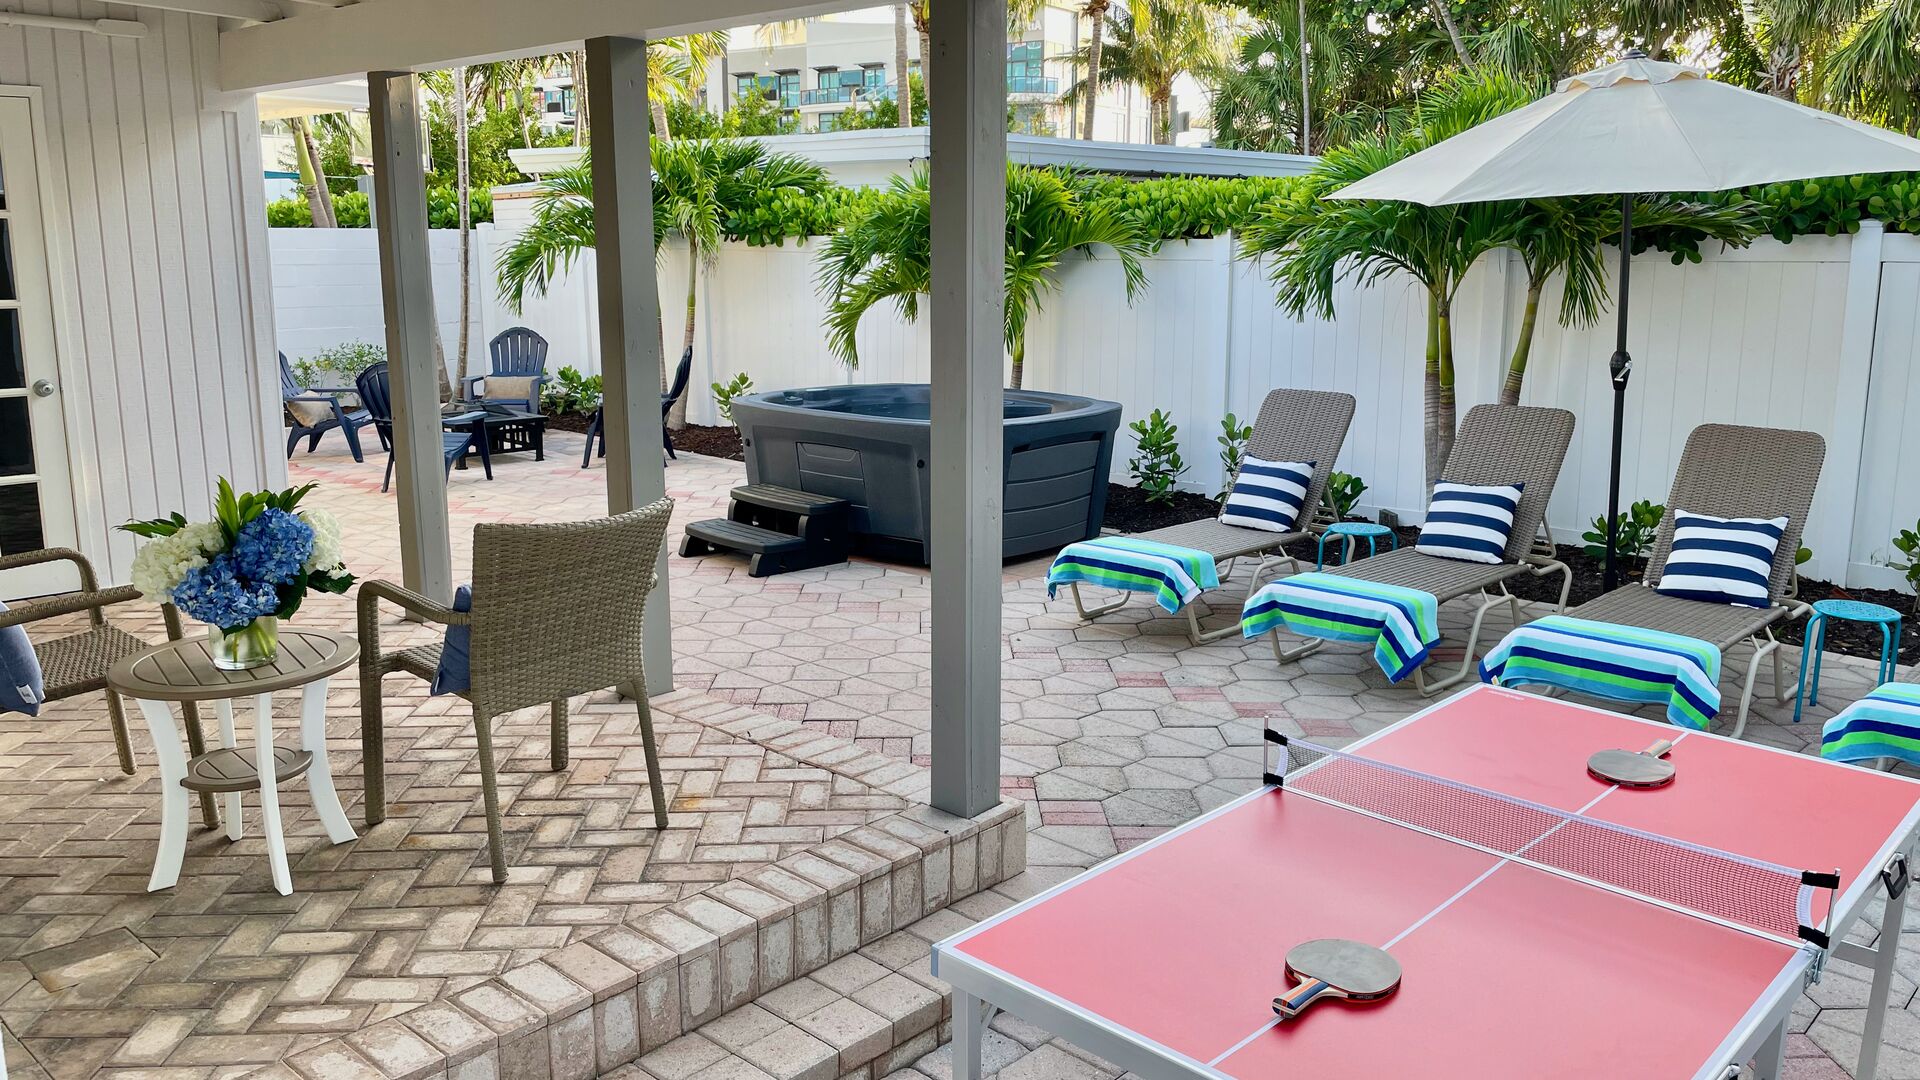 Outside, you will find a world of relaxation! There are plenty of lounging chairs, perfect for bathing in the famous Florida sun. There is also a ping-pong table, and a hot tub!